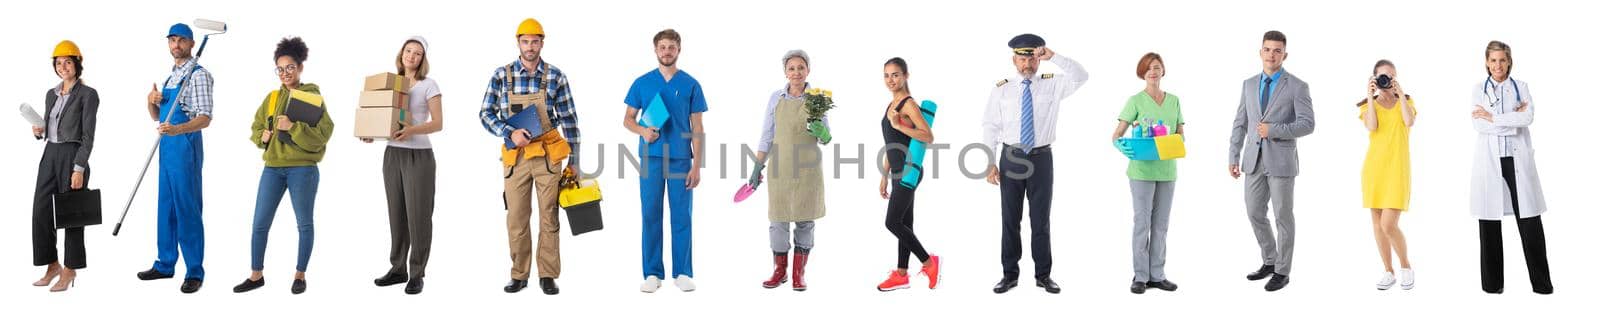 Set of professional workers different professions Isolated over white background.